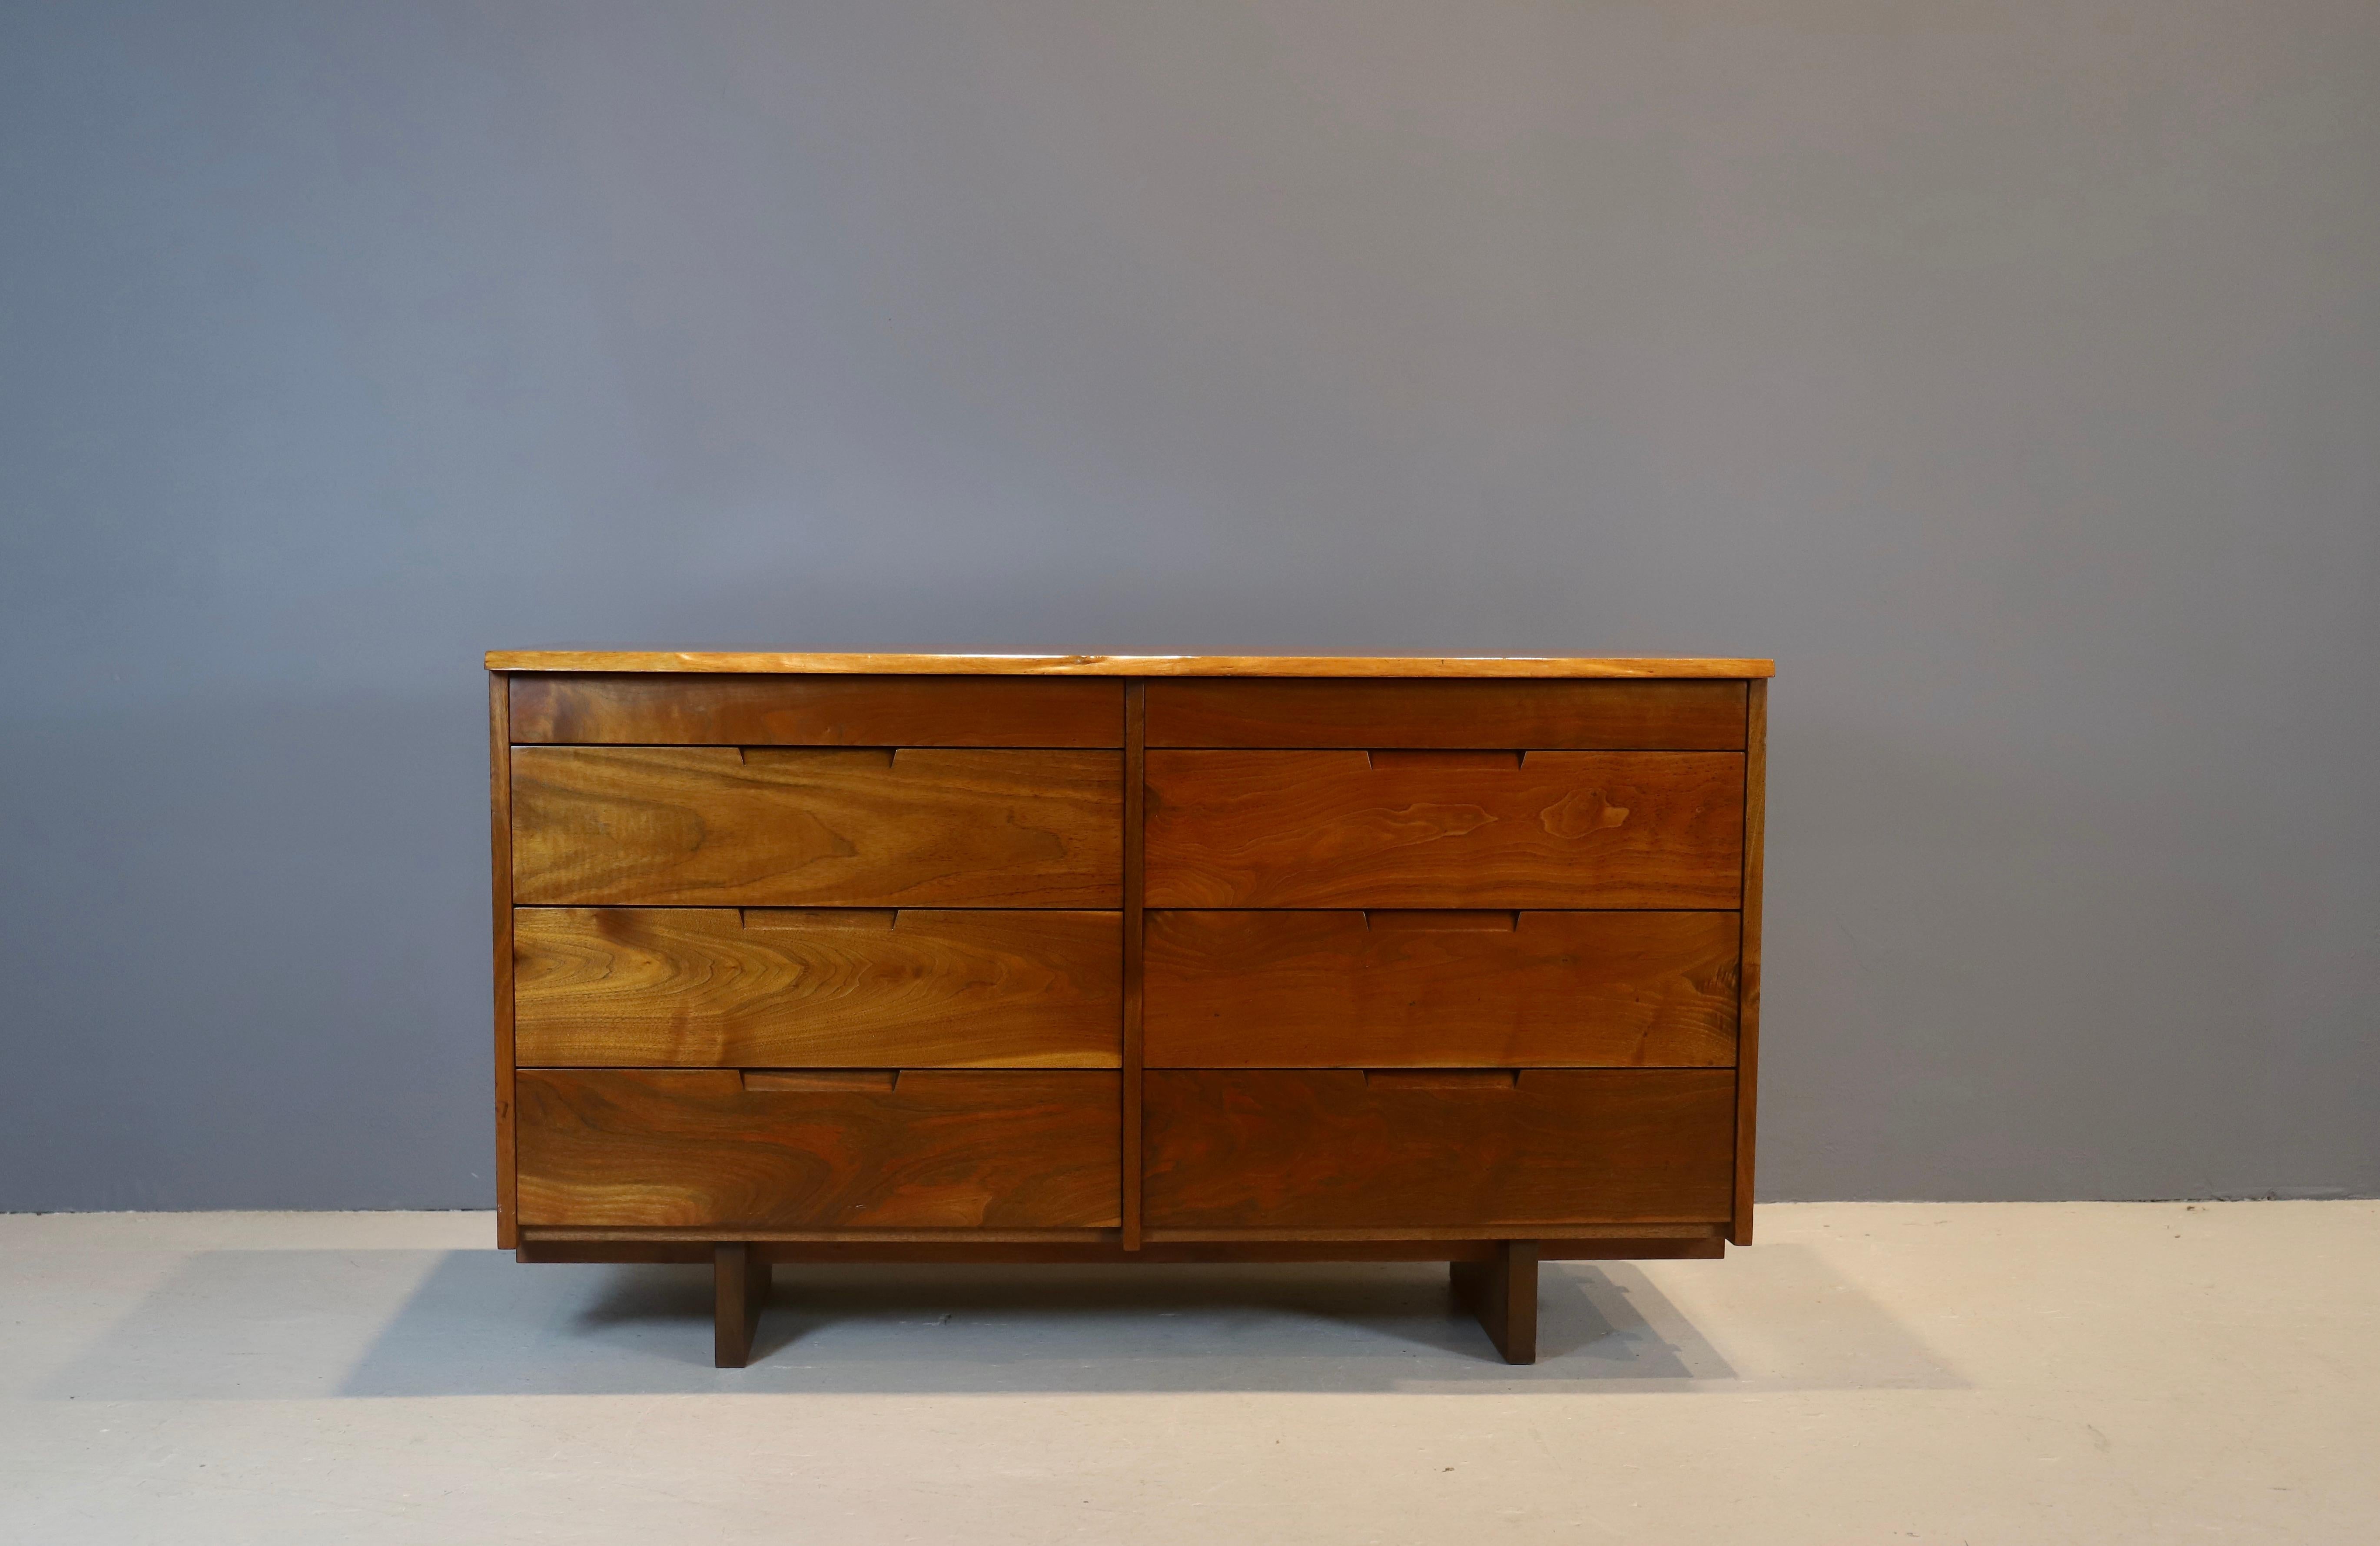 Black American walnut chest of drawers by studio artist George Nakashima, circa 1960s, New Hope, PA.
Chest features 8 drawers and live edge top. Warm patina through - out.
Chest has been cleaned and oiled as per Nakashima studio instructions.
Ne